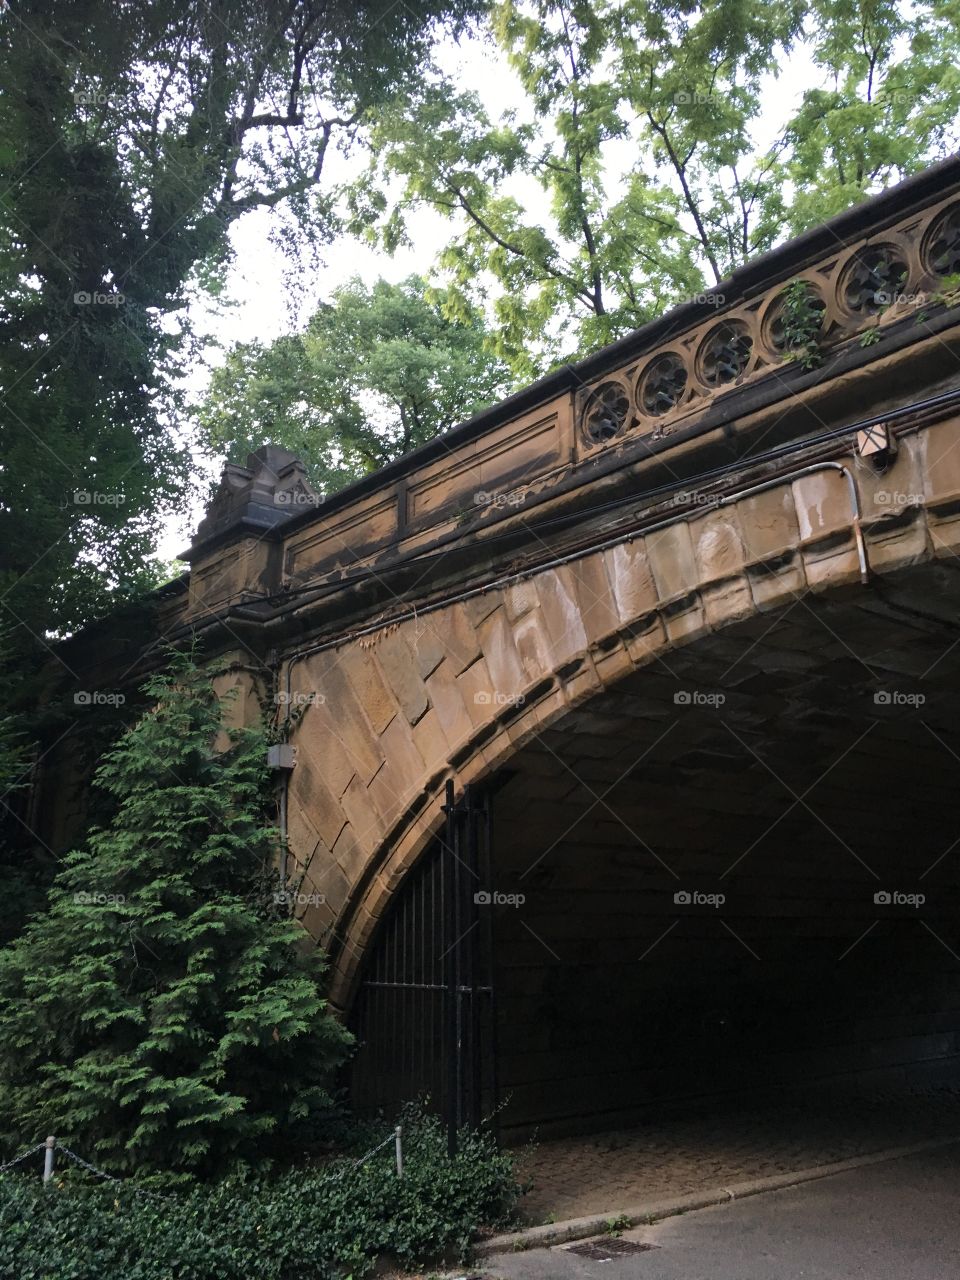 Artistic view of a bridge in Central Park NYC. Summer bliss and calm found while exploring nature in the heart of the city 